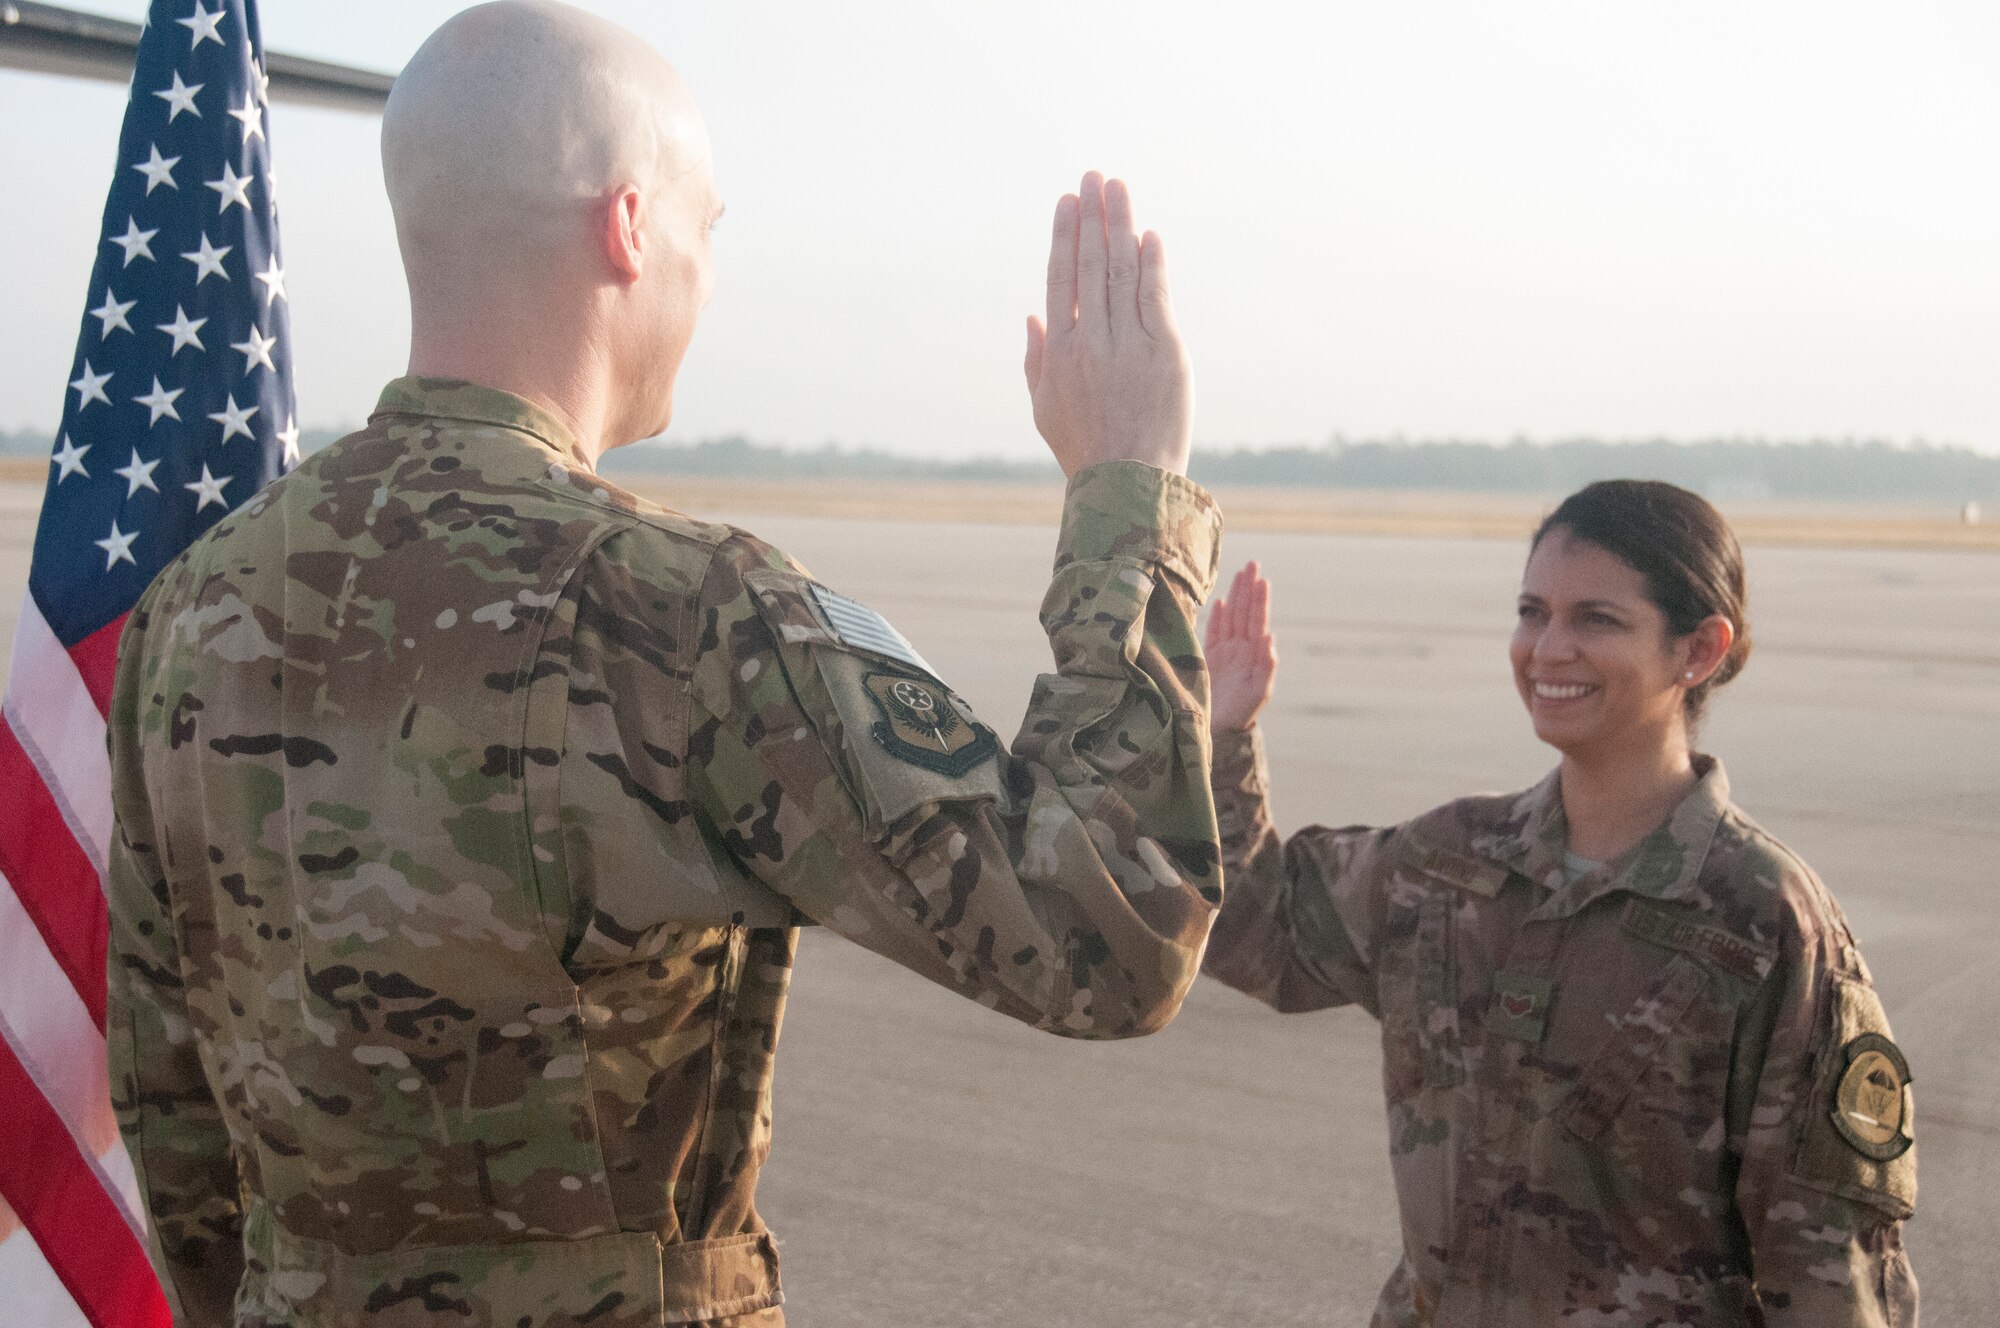 Staff Sgt. Kelly Andino re-enlistment